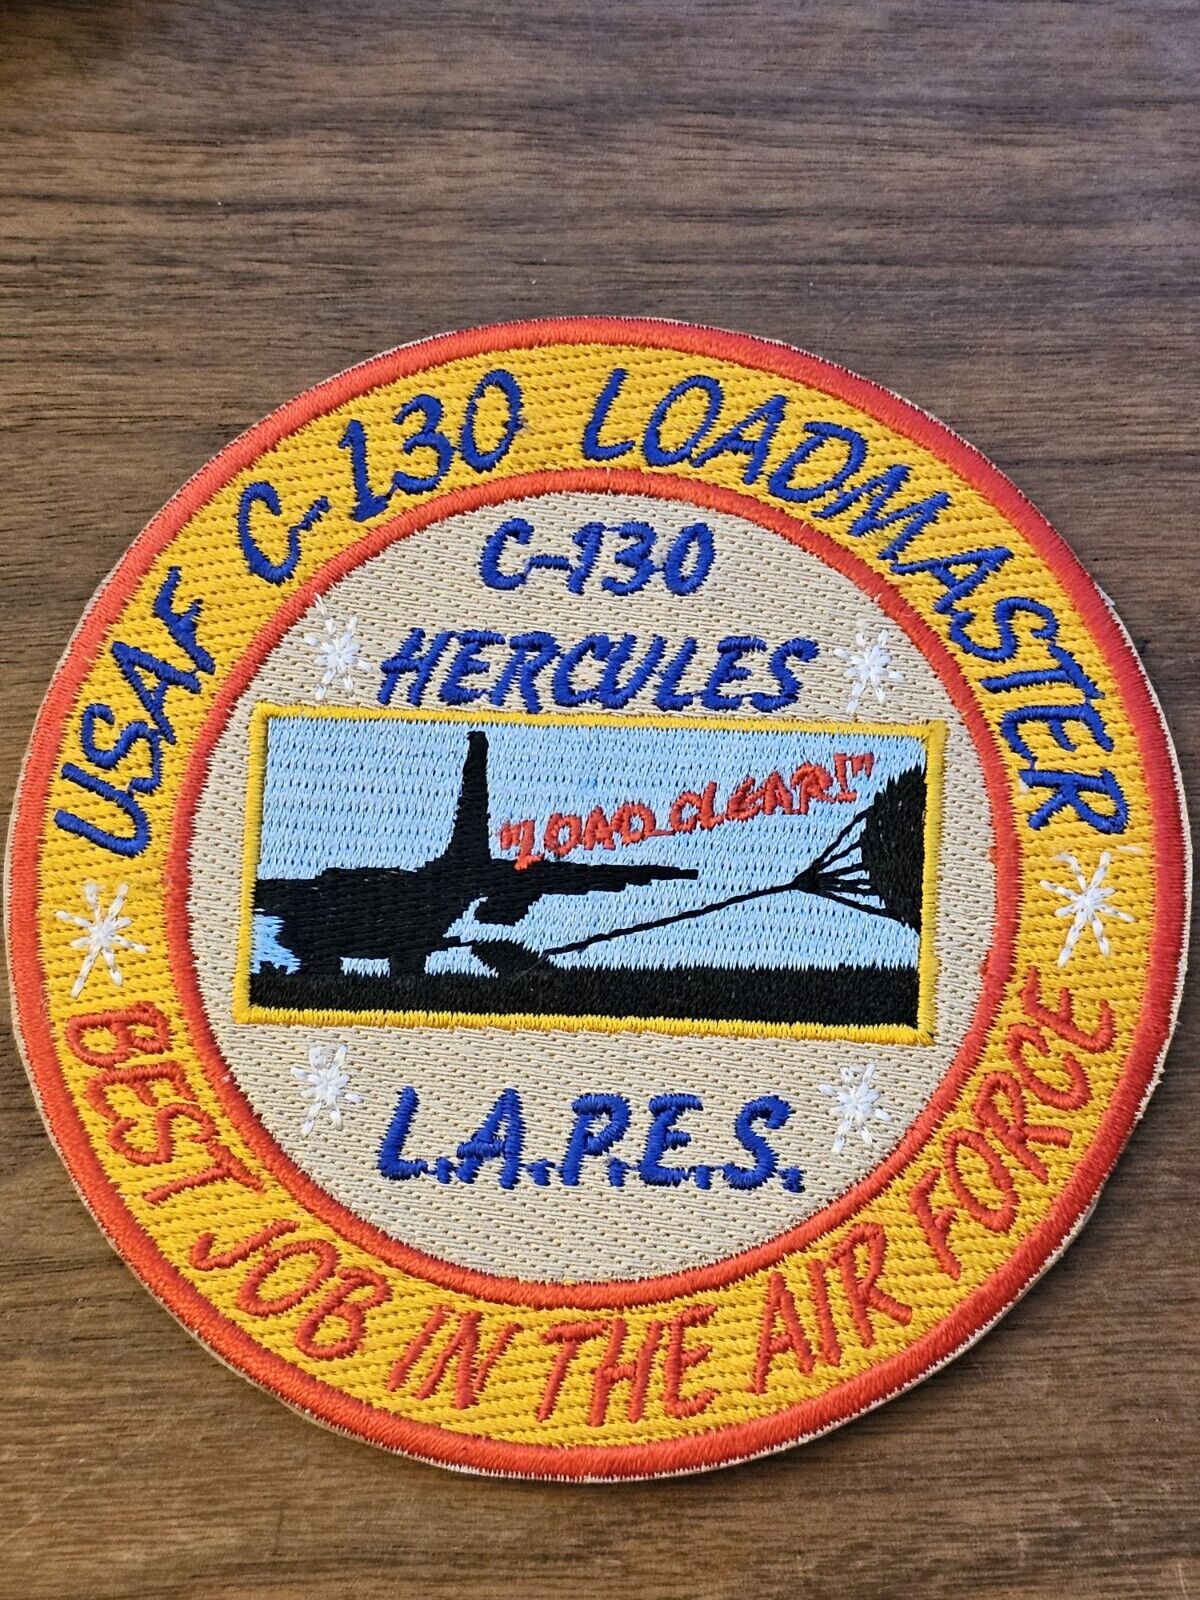 USAF C-130 LOADMASTER, L.A.P.E.S., BEST JOB IN THE AIR FORCE